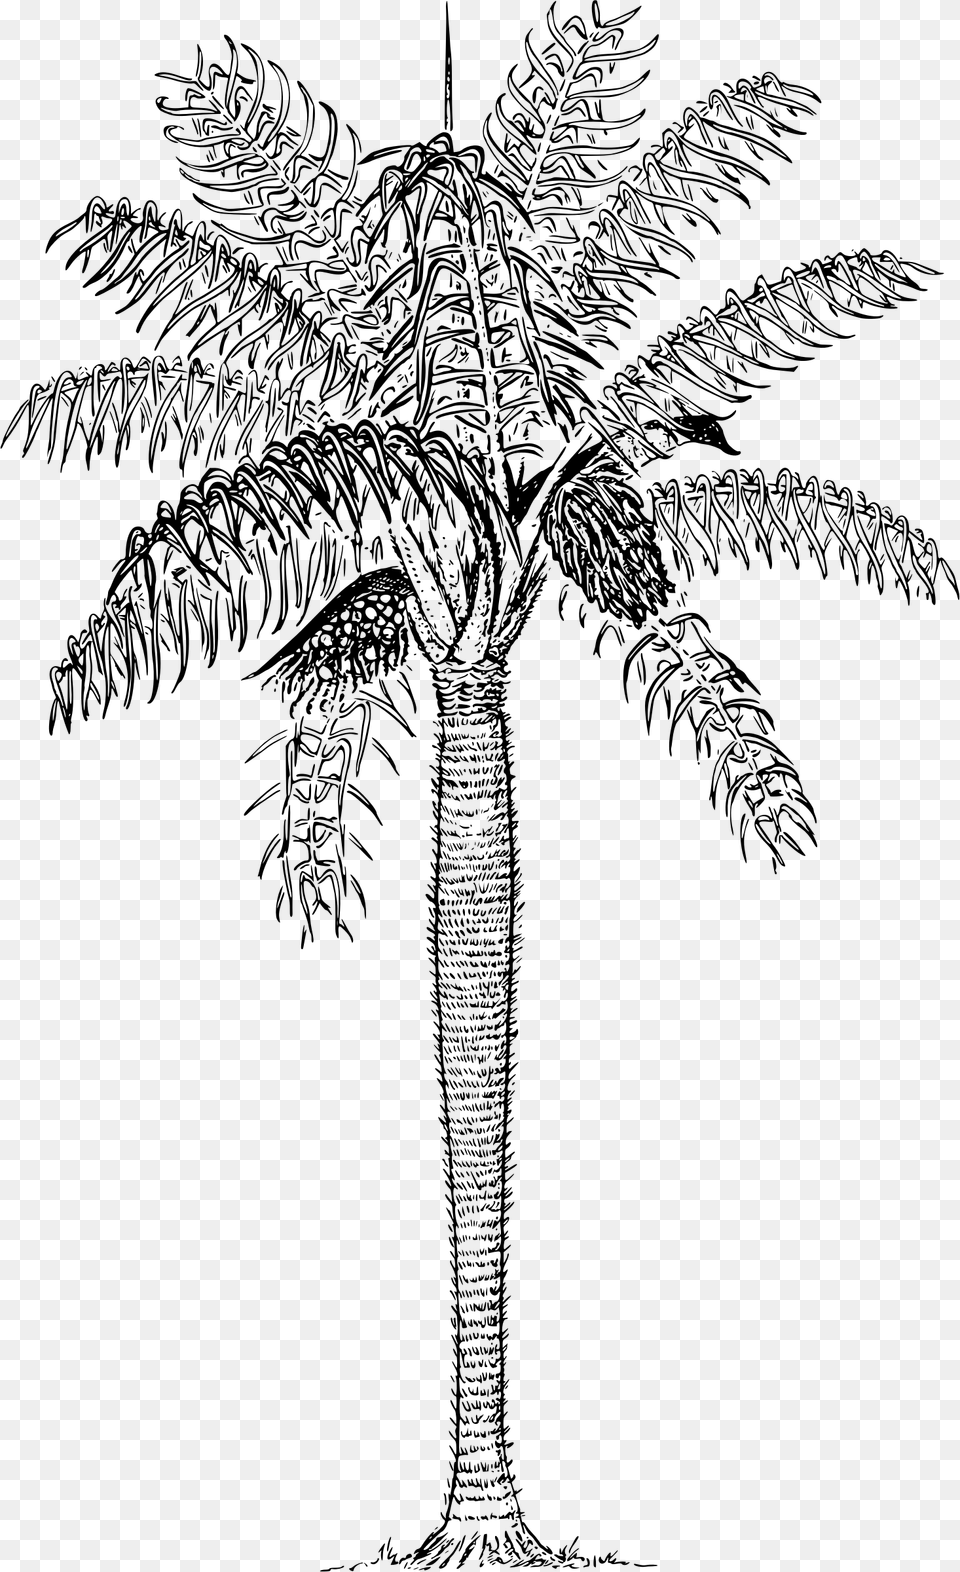 This Free Icons Design Of Prickly Palm, Gray Png